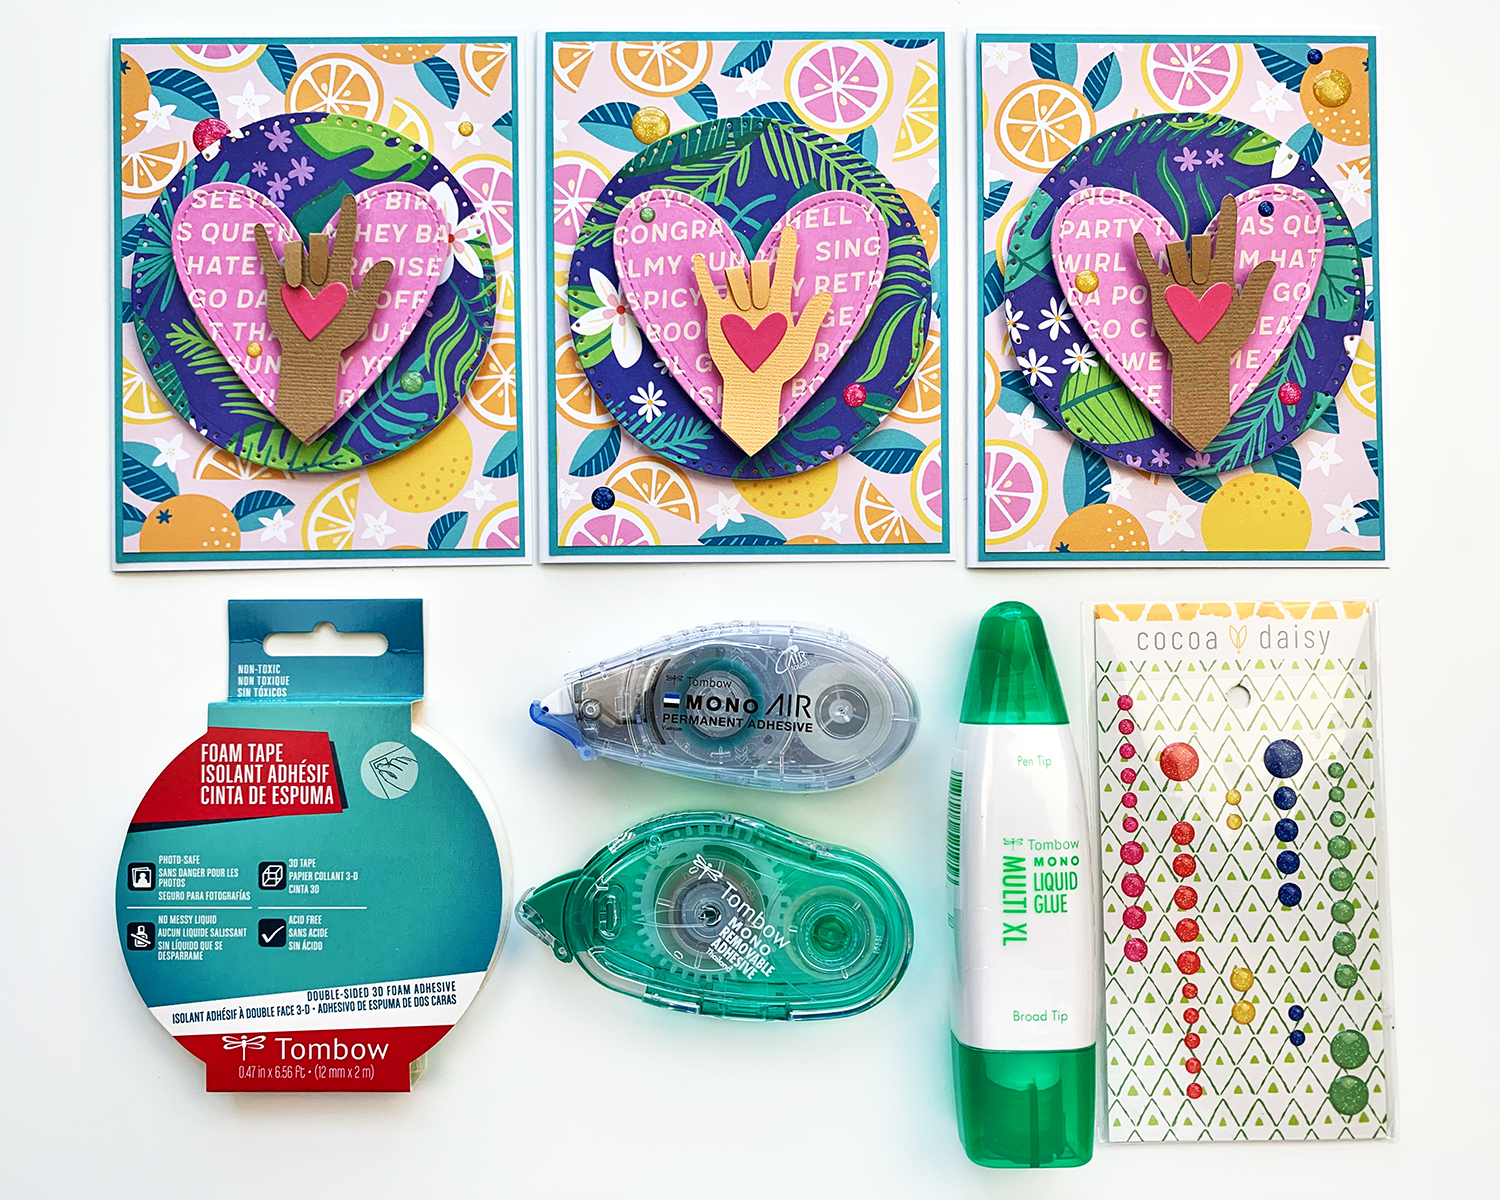 Make Friendship Cards in Minutes with an Assembly Line Process - Tombow USA  Blog